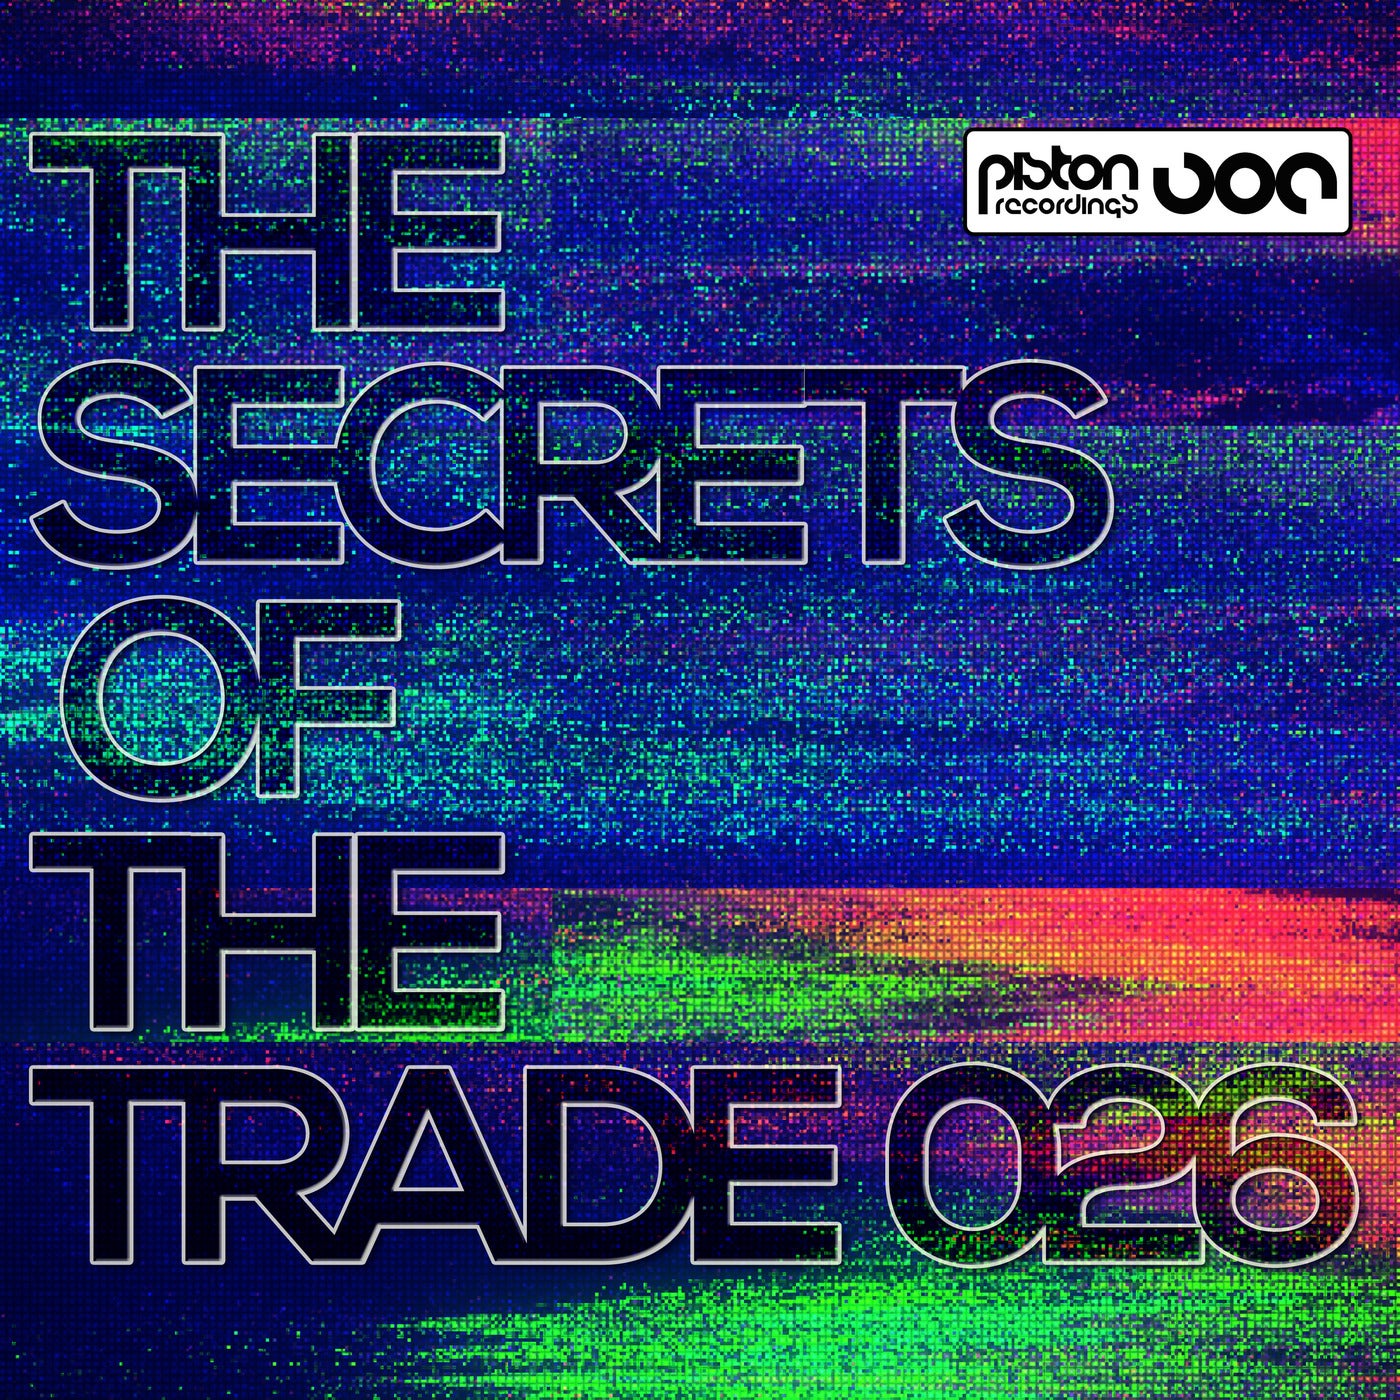 The Secrets Of The Trade 026